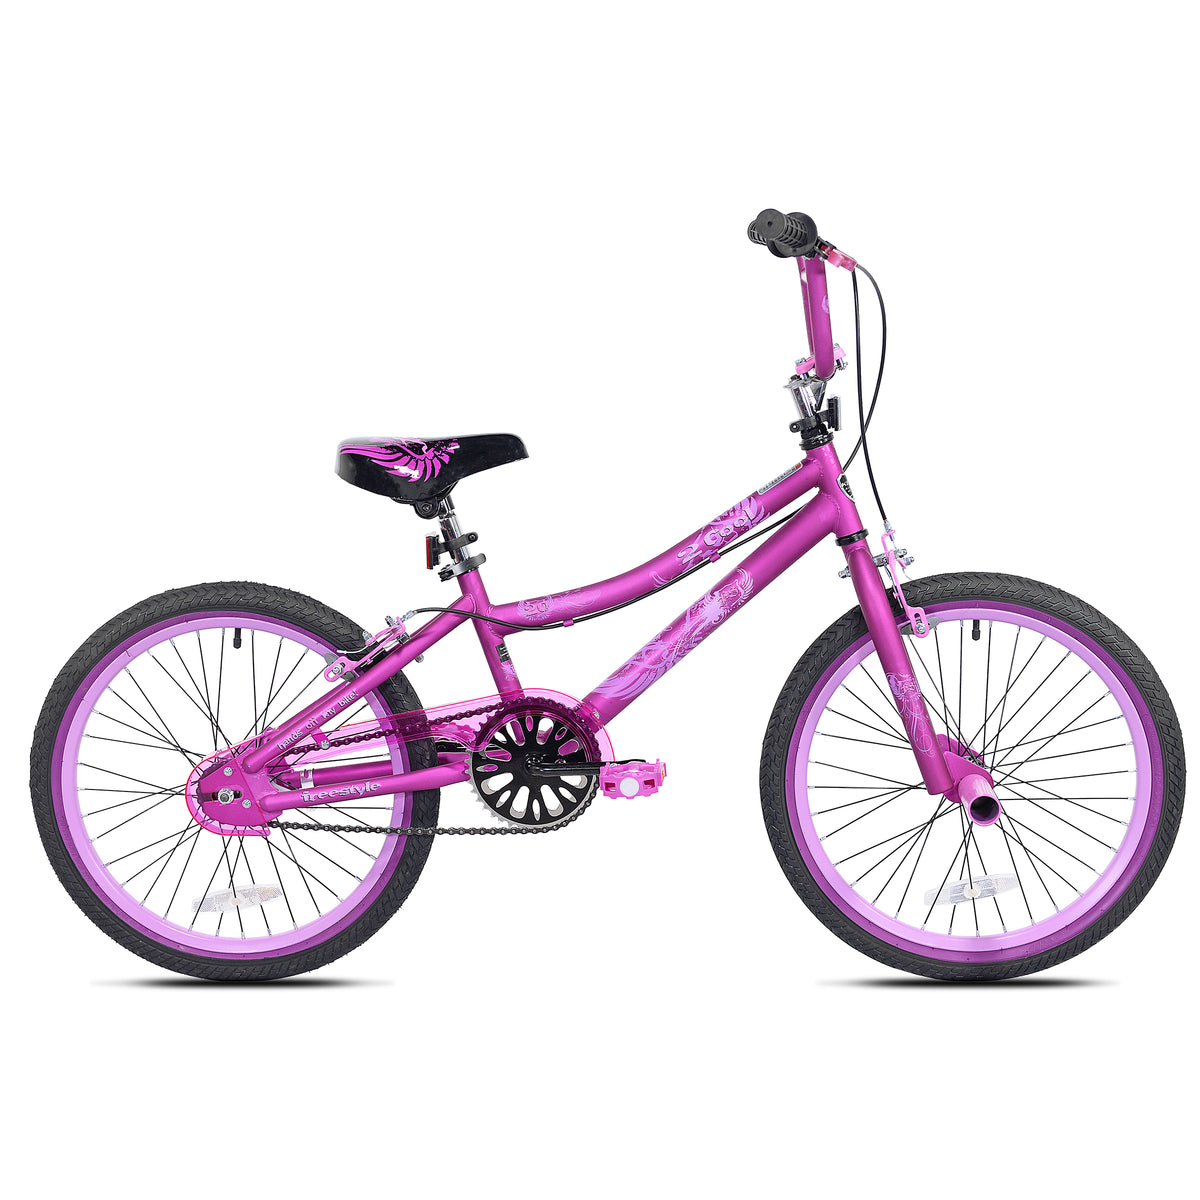 20" Kent 2 Cool | Bike for Kids Ages 7-13